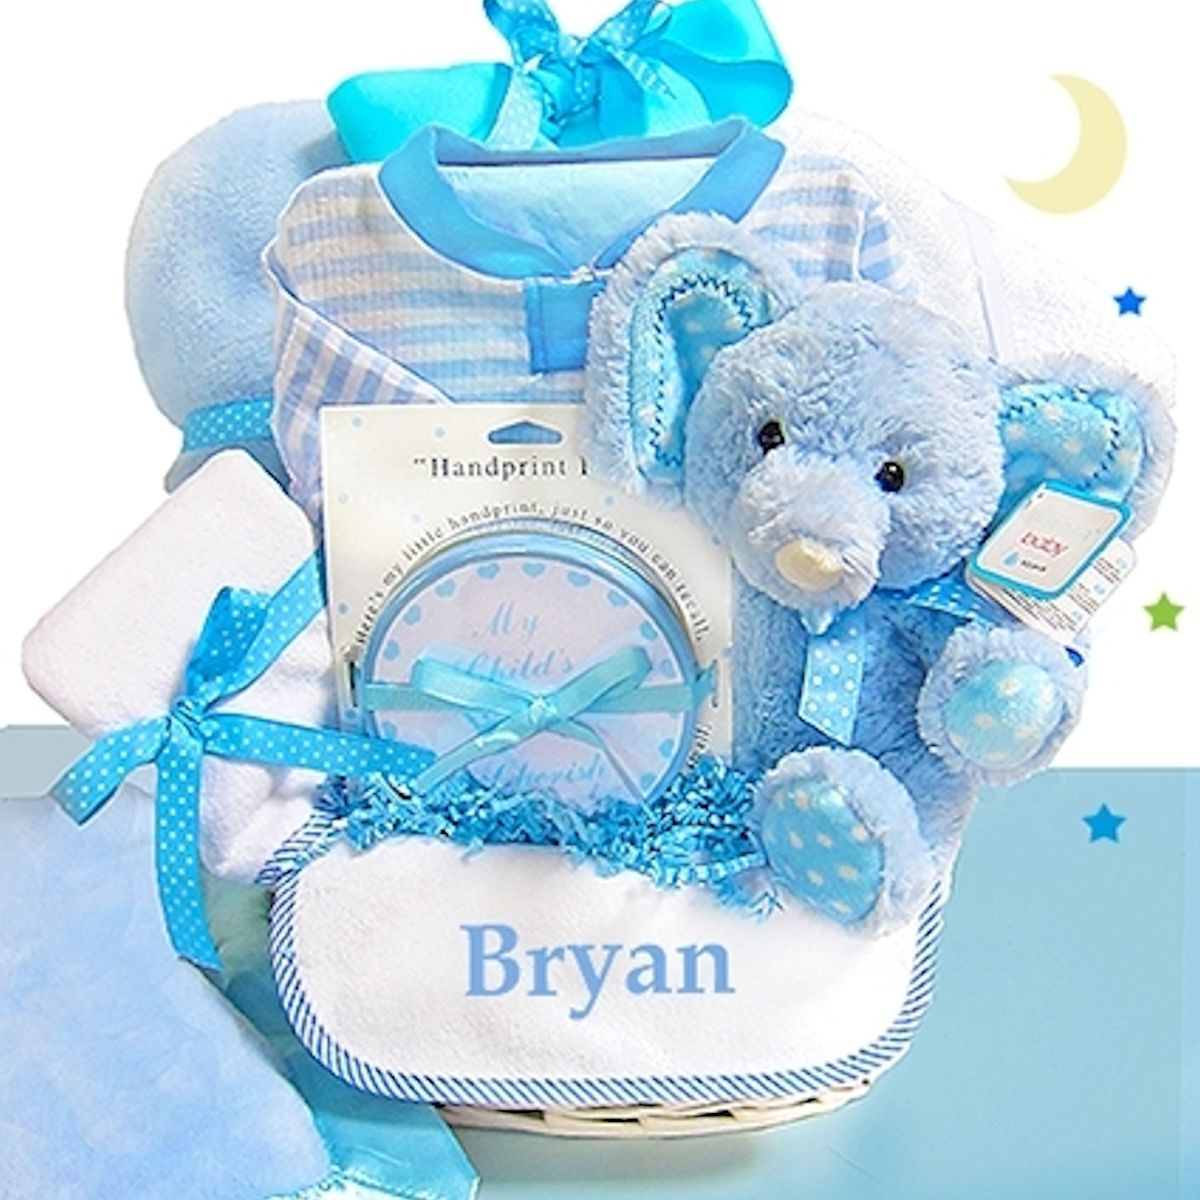 personalized-gifts-for-baby-boy-new-baby-boy-gift-basket-blue-elephant-of-personalized-gifts-for-baby-boy.jpg